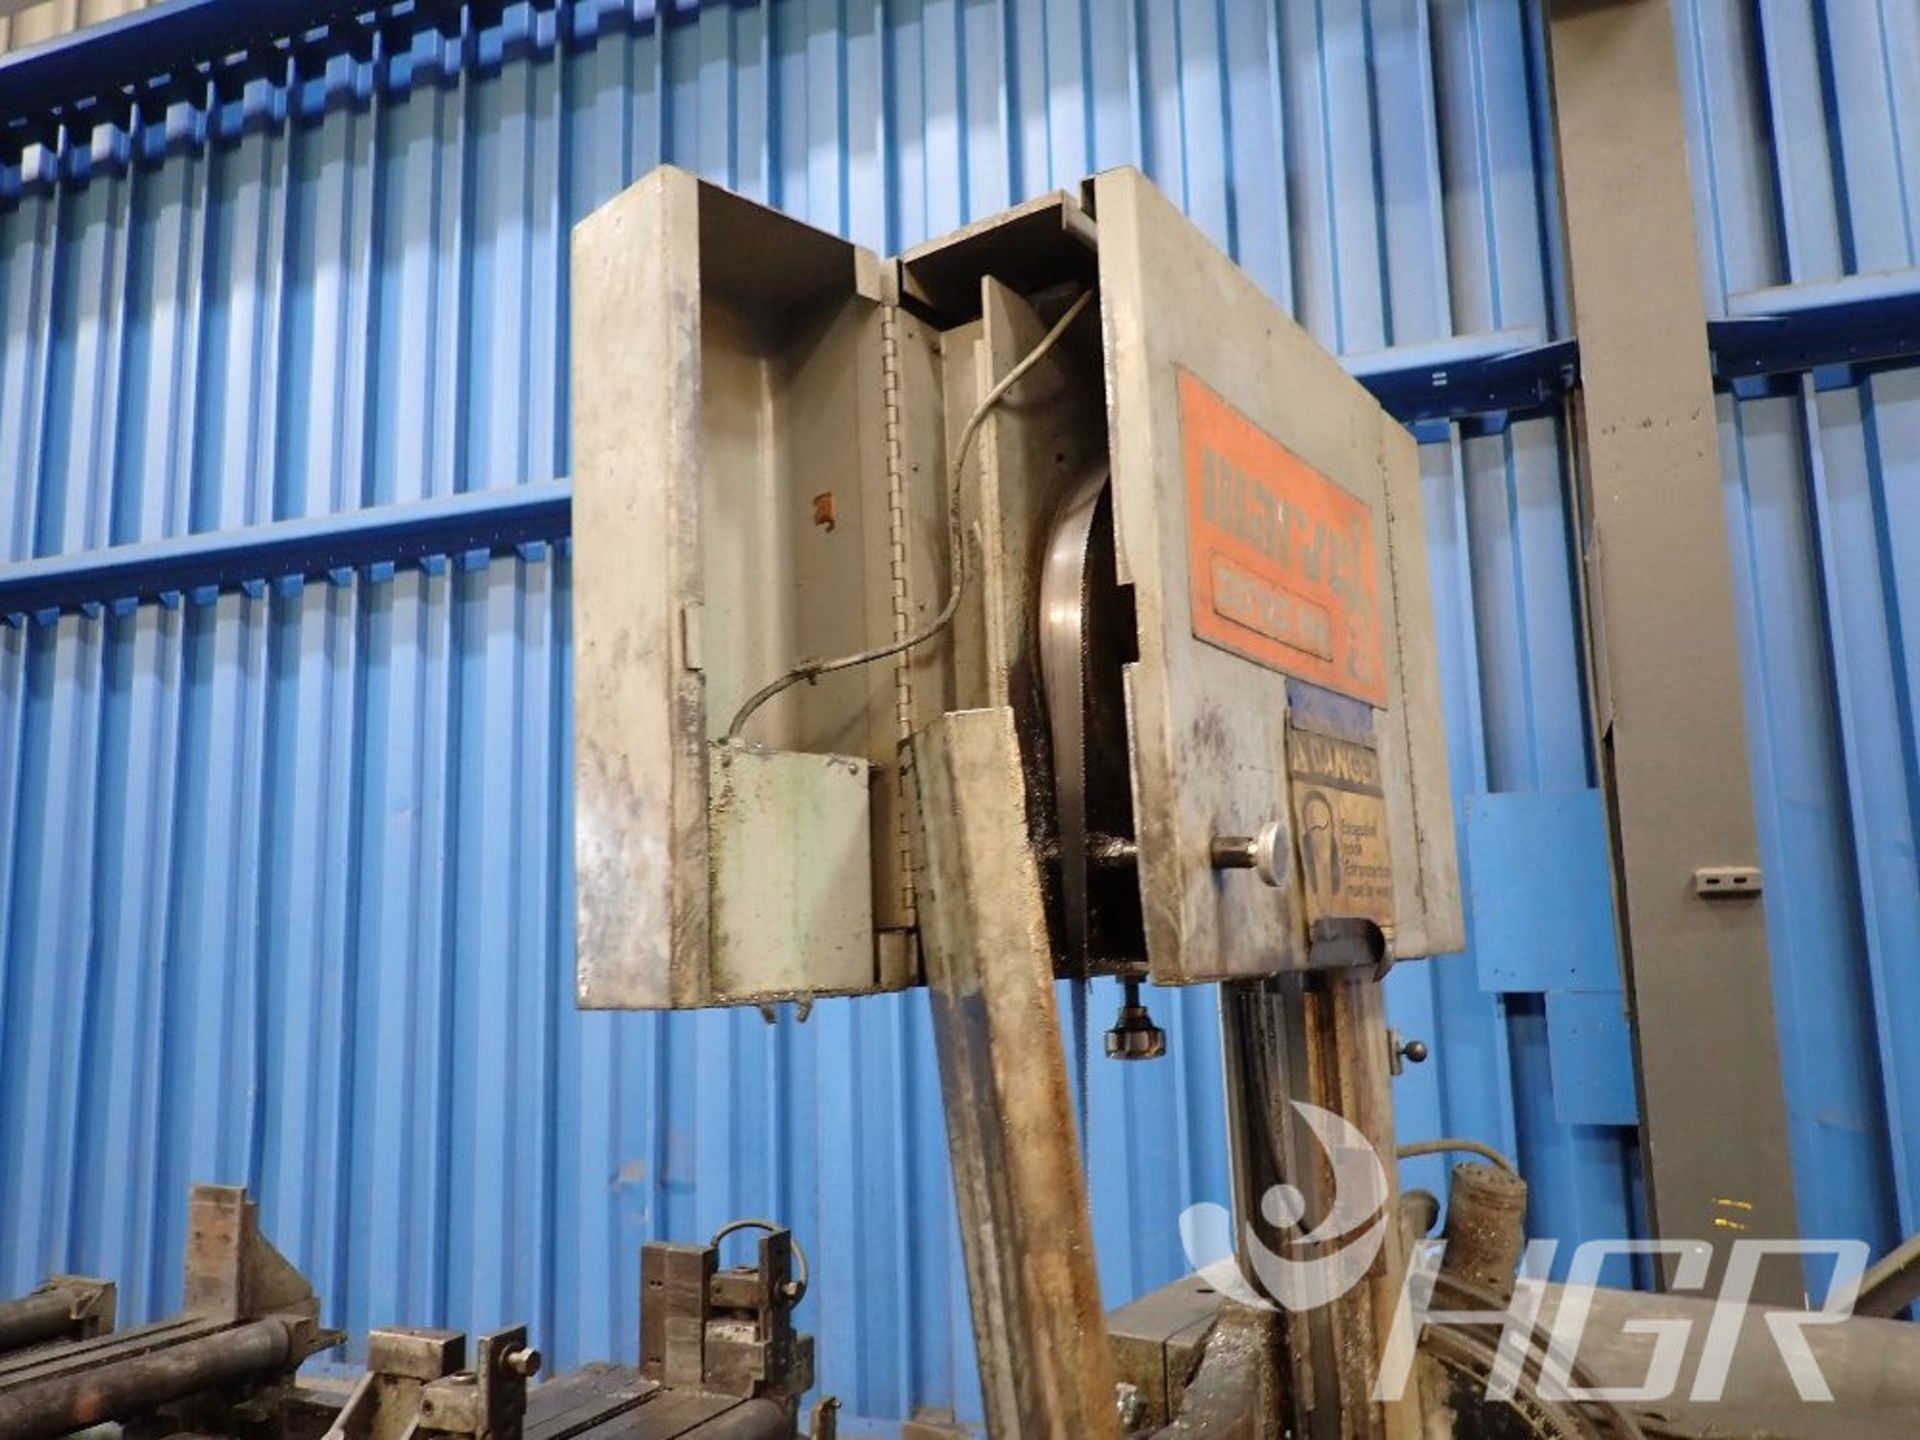 MARVEL VERTICAL BANDSAW, Model 81A, Date: n/a; s/n E-393910PC-W, Approx. Capacity: 18", Power: 3/ - Image 9 of 26